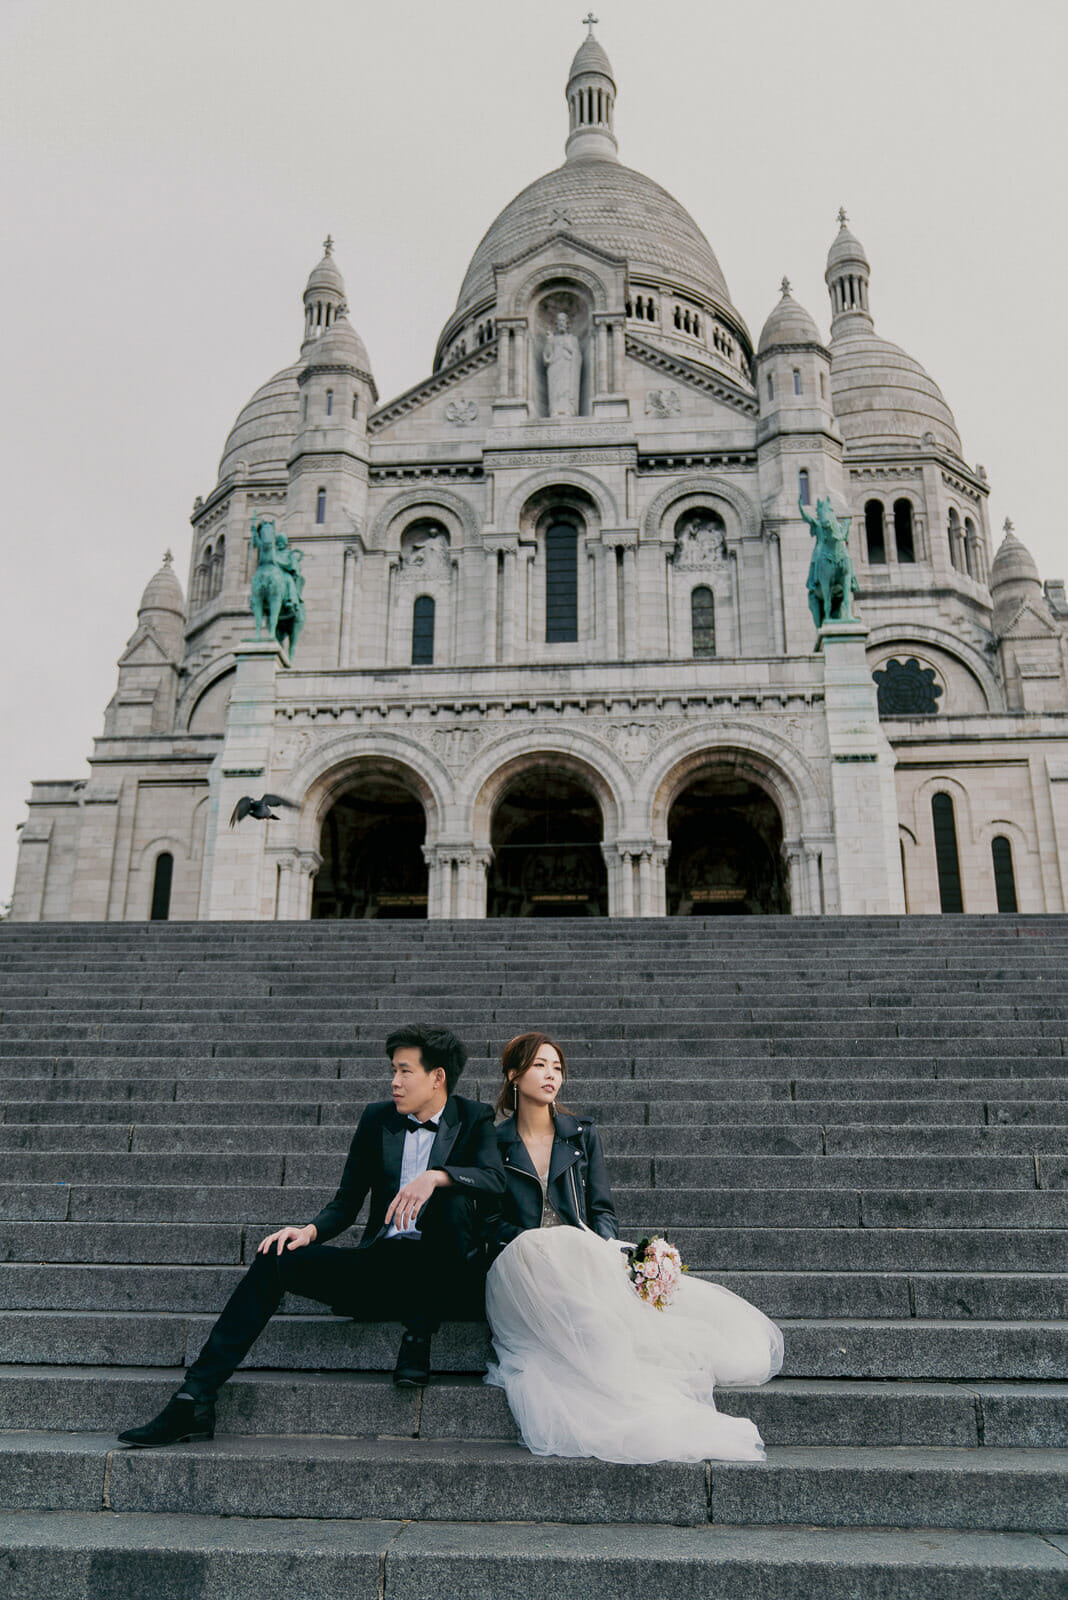 Fashionable couple pre-wedding photoshoot at Montmartre on the stairs below Sacre Coeur